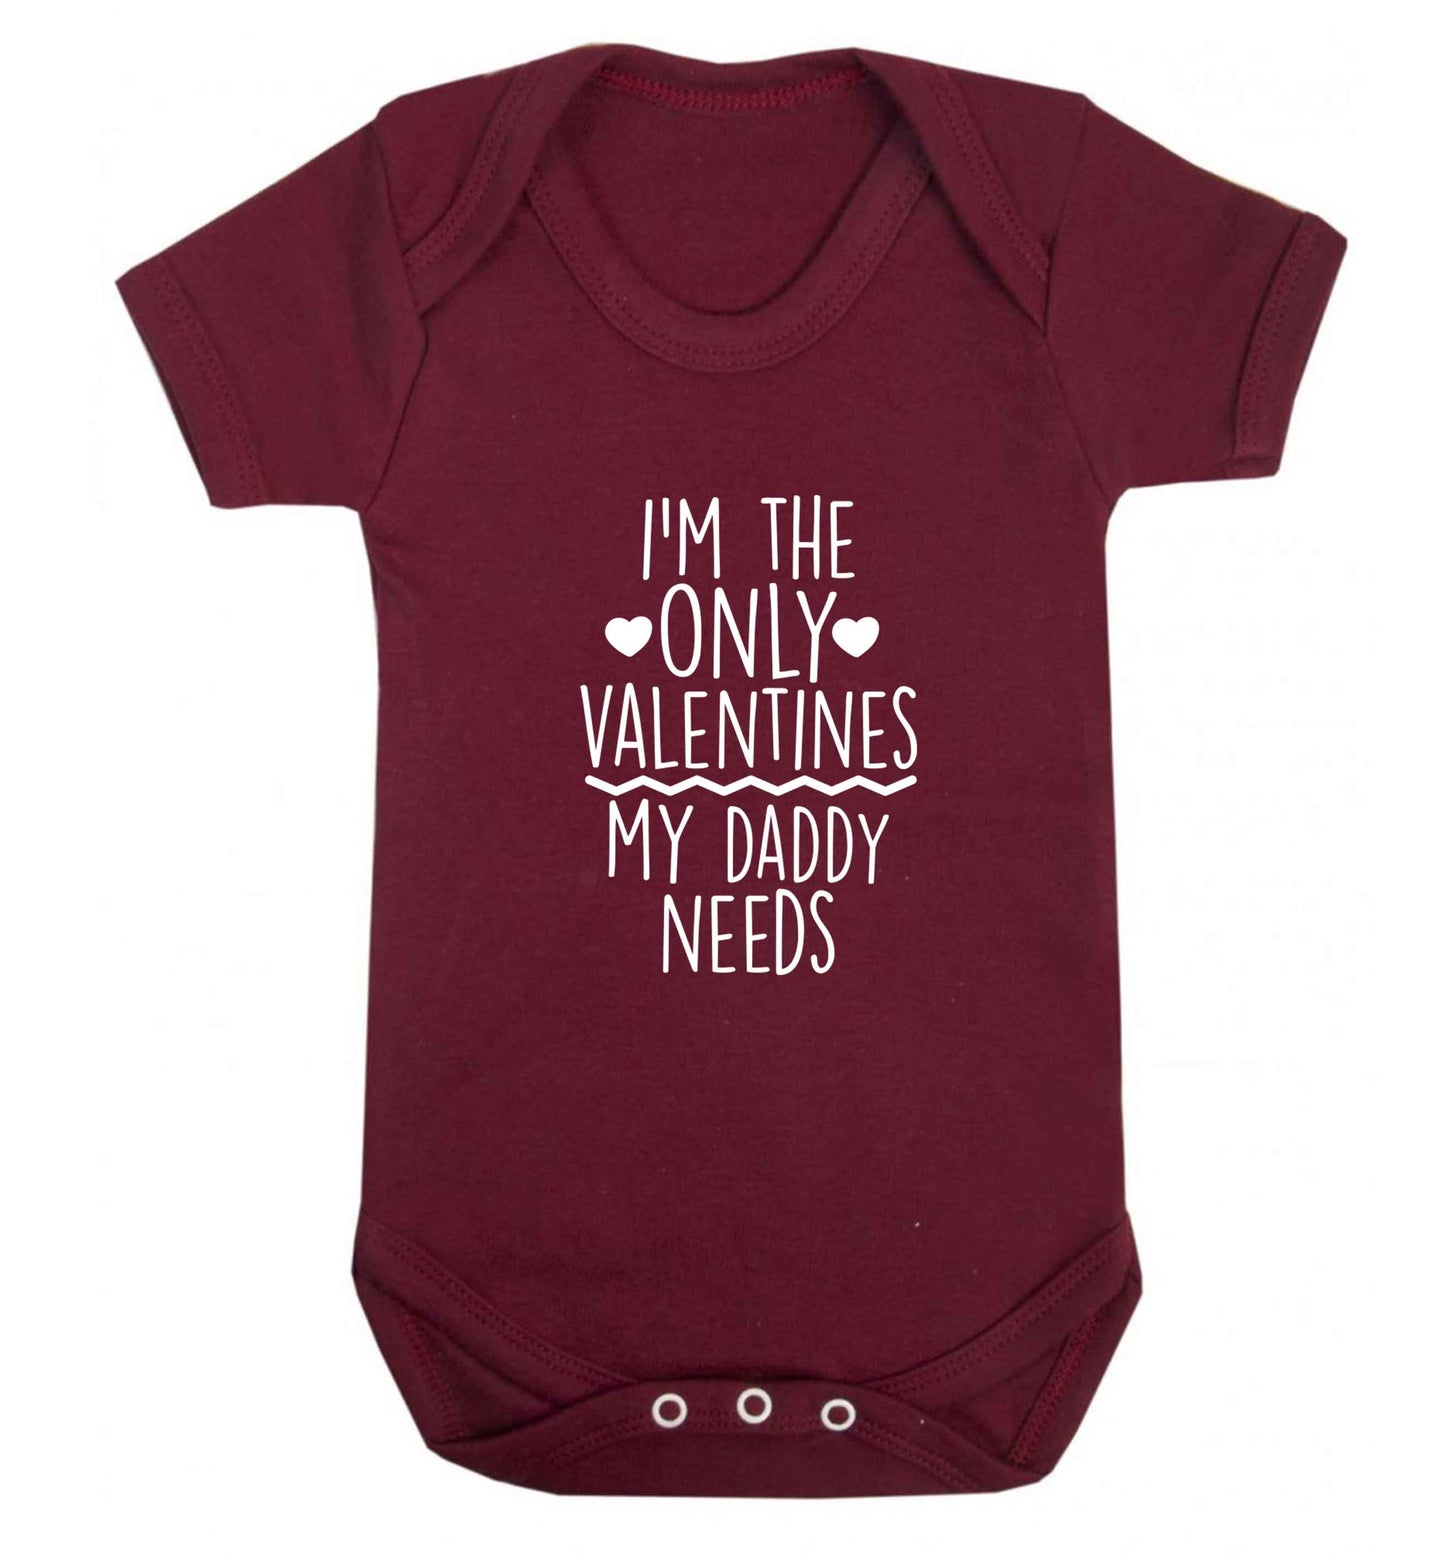 I'm the only valentines my daddy needs baby vest maroon 18-24 months